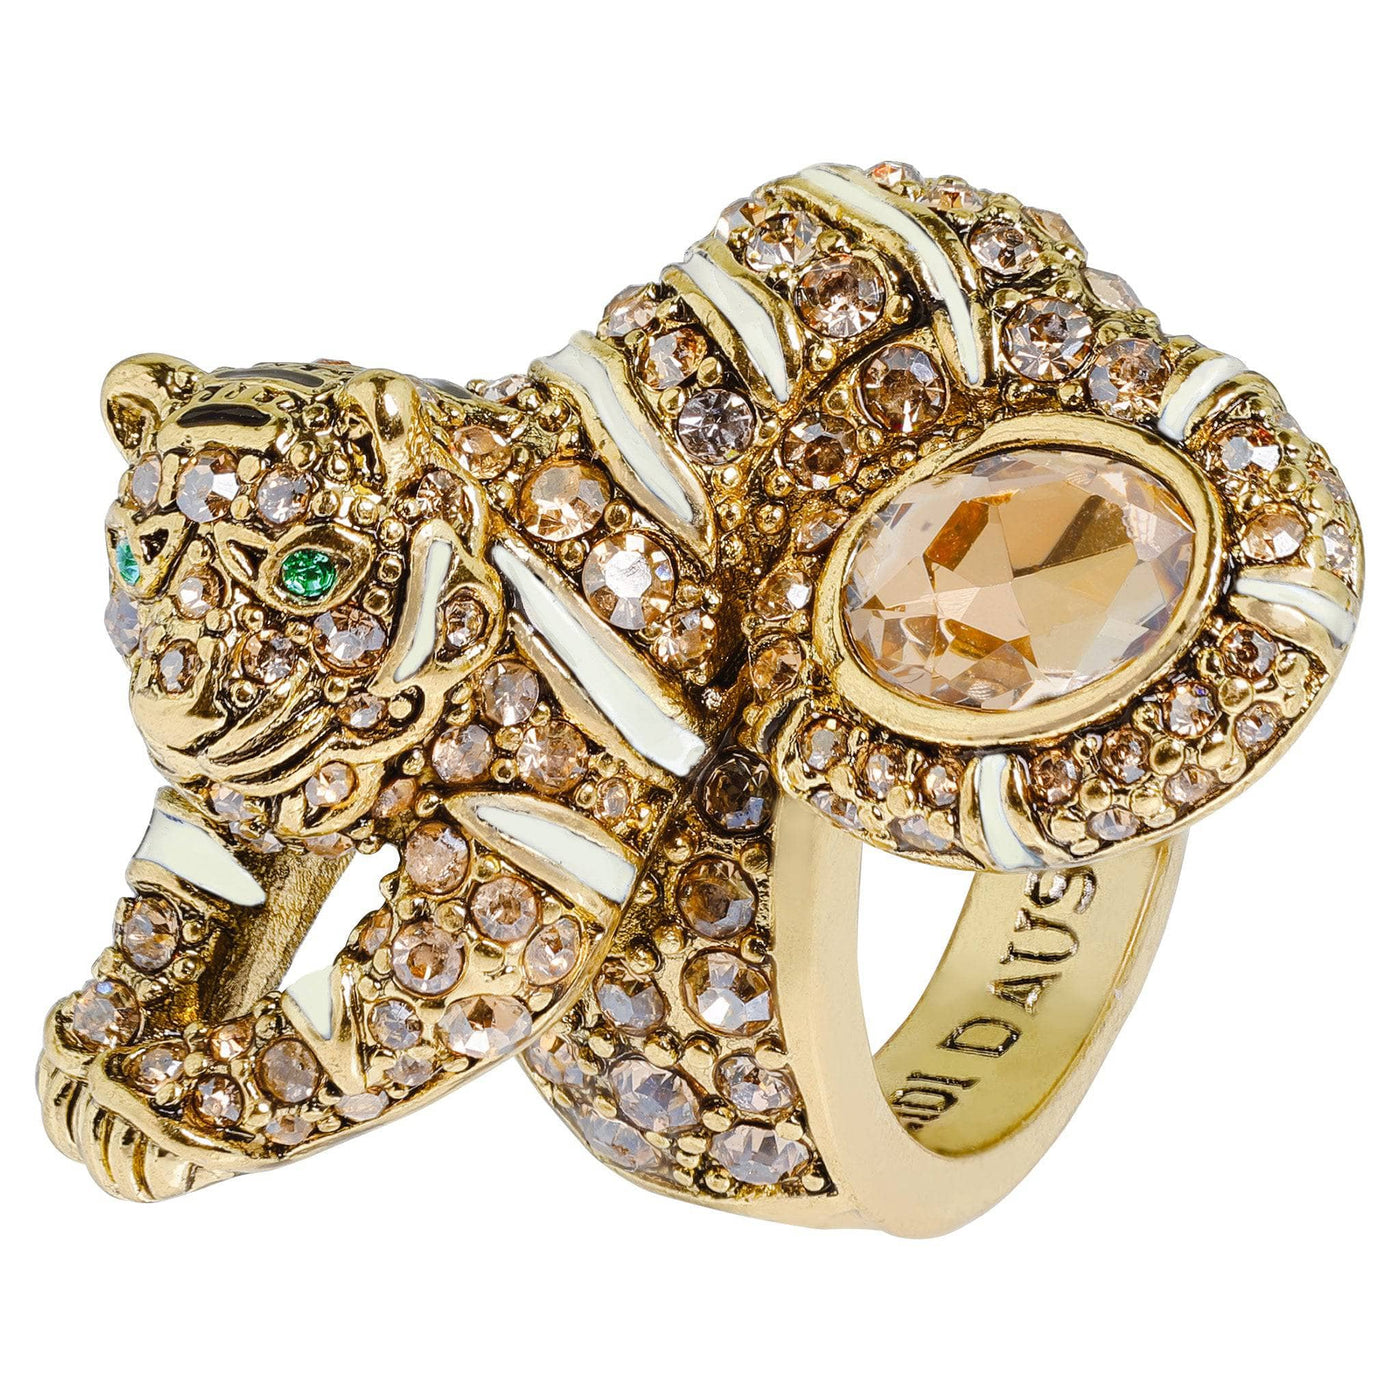 Tiger head 999 gold or 24k ring, Women's Fashion, Jewelry & Organisers,  Rings on Carousell